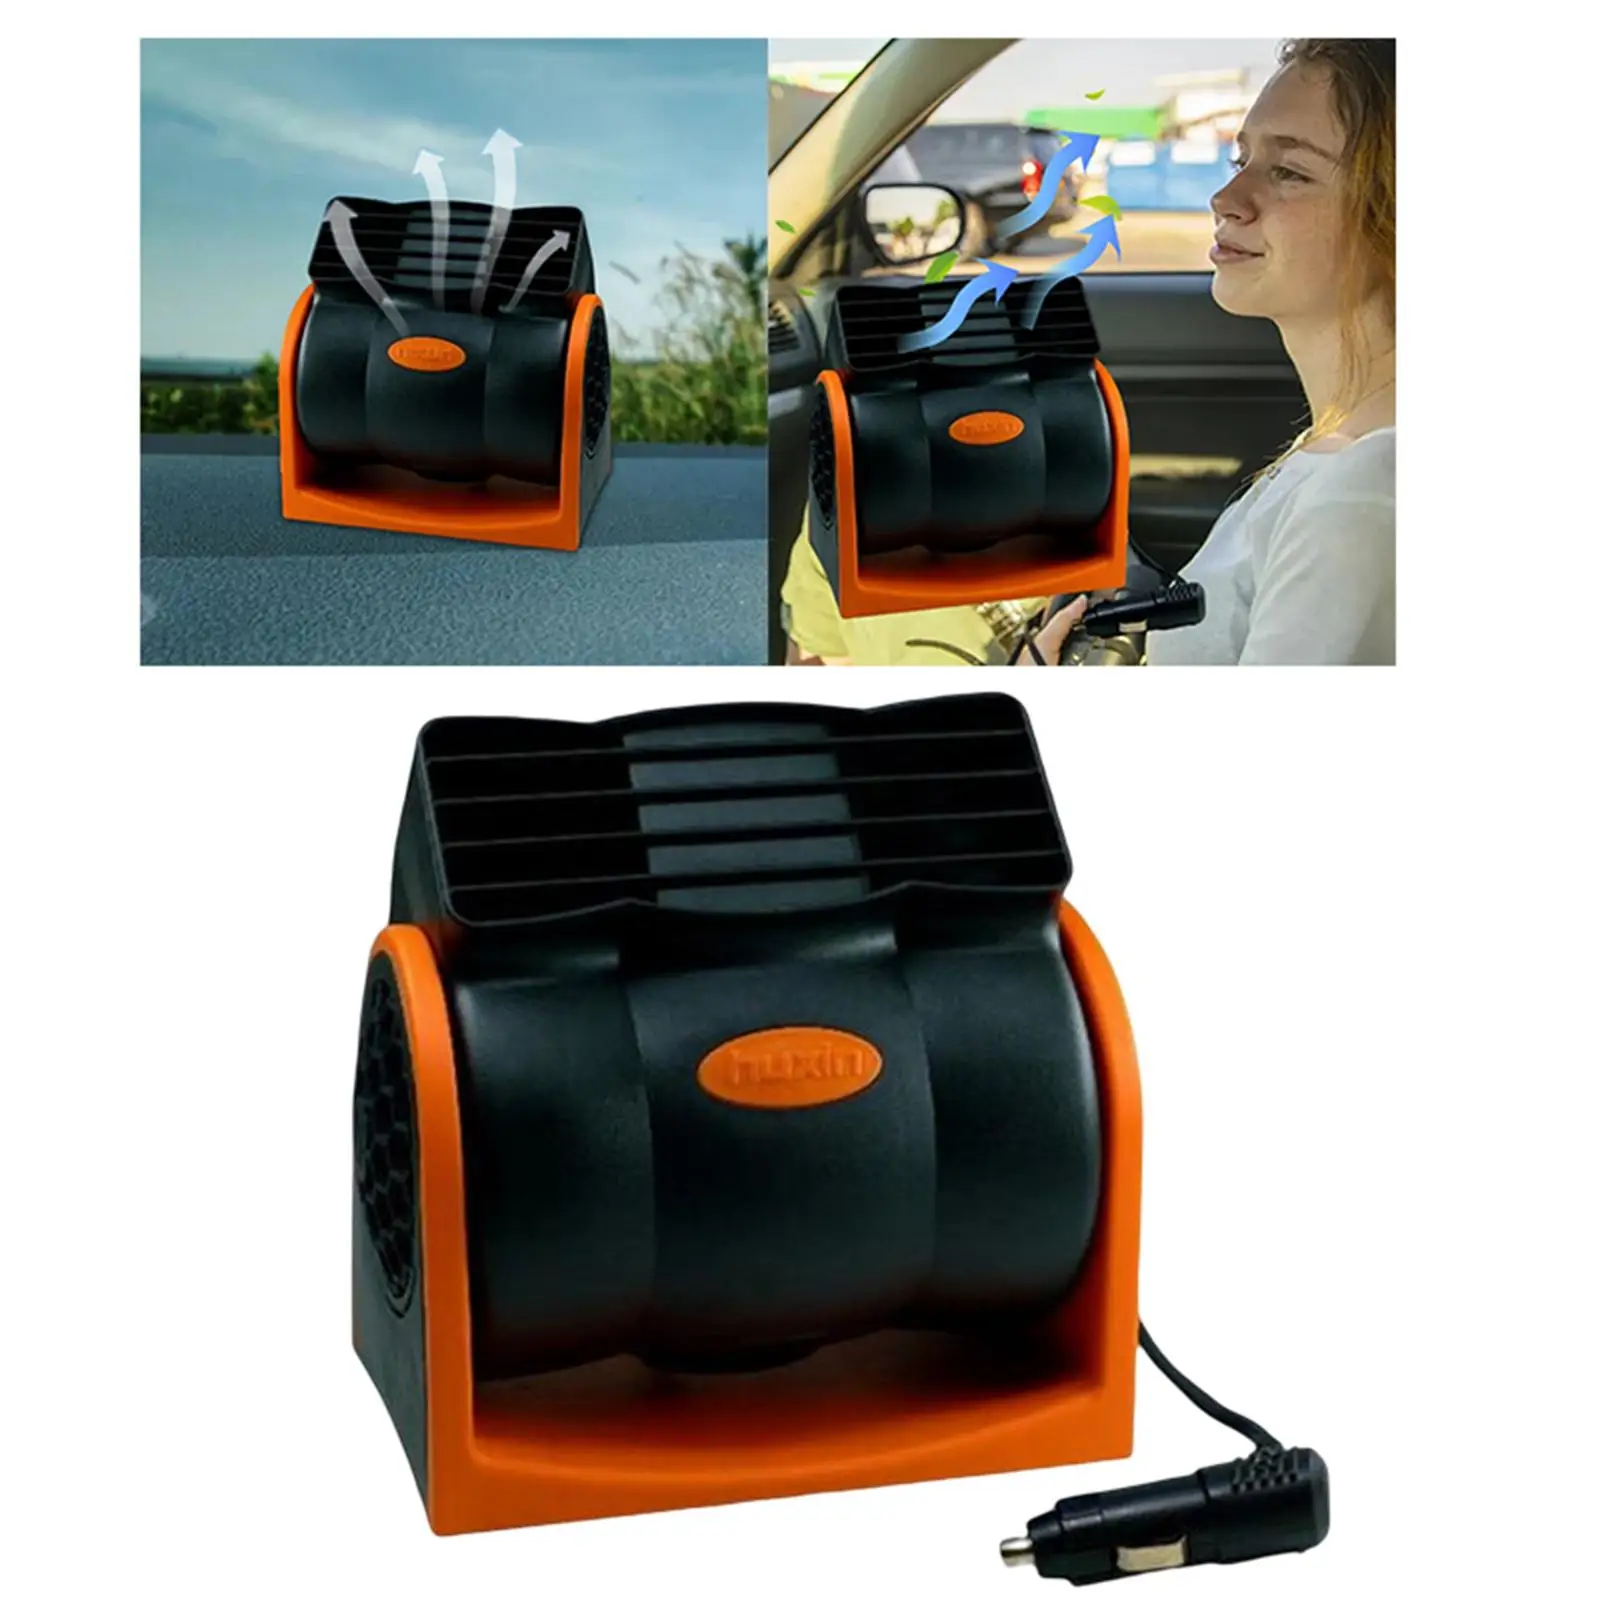 Vehicle 24V Car Truck Cooling Air Fan Fanless Design Plug and Play Silent Professional for Boat Van SUV Auto Cooler Ventilation